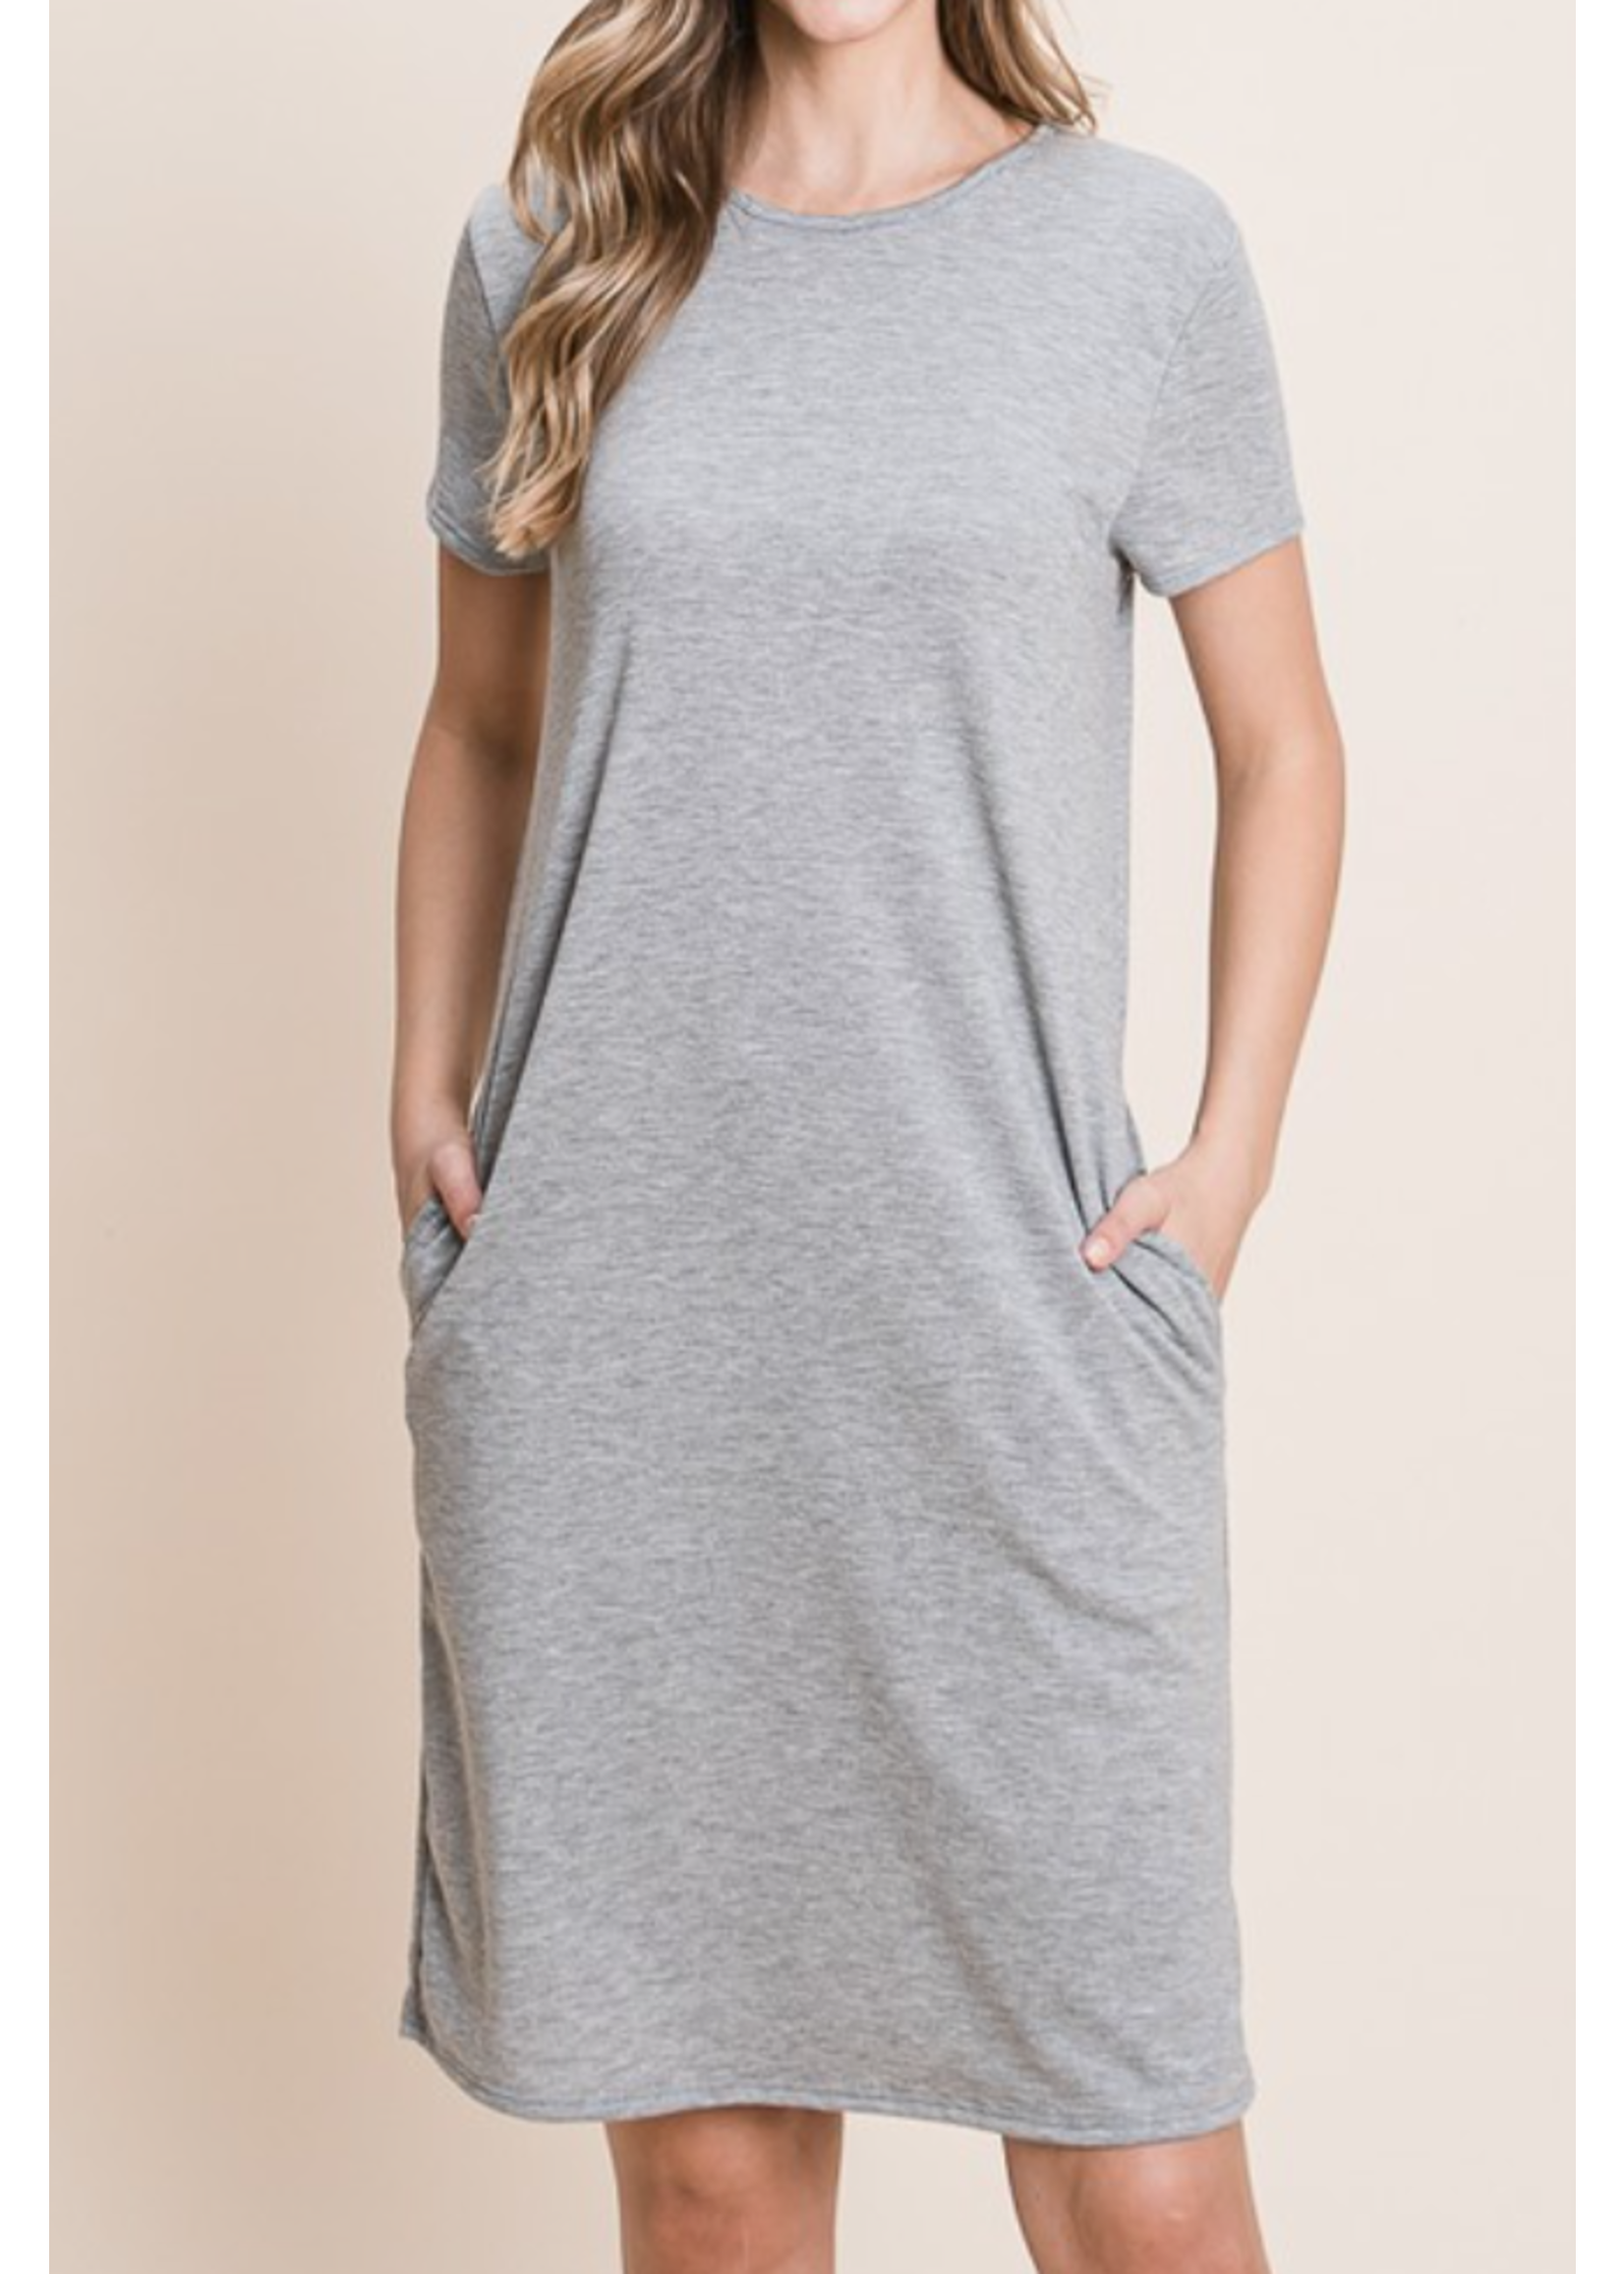 BBDA1289 -RELAXED FIT BASIC SOLID SHIFT DRESS